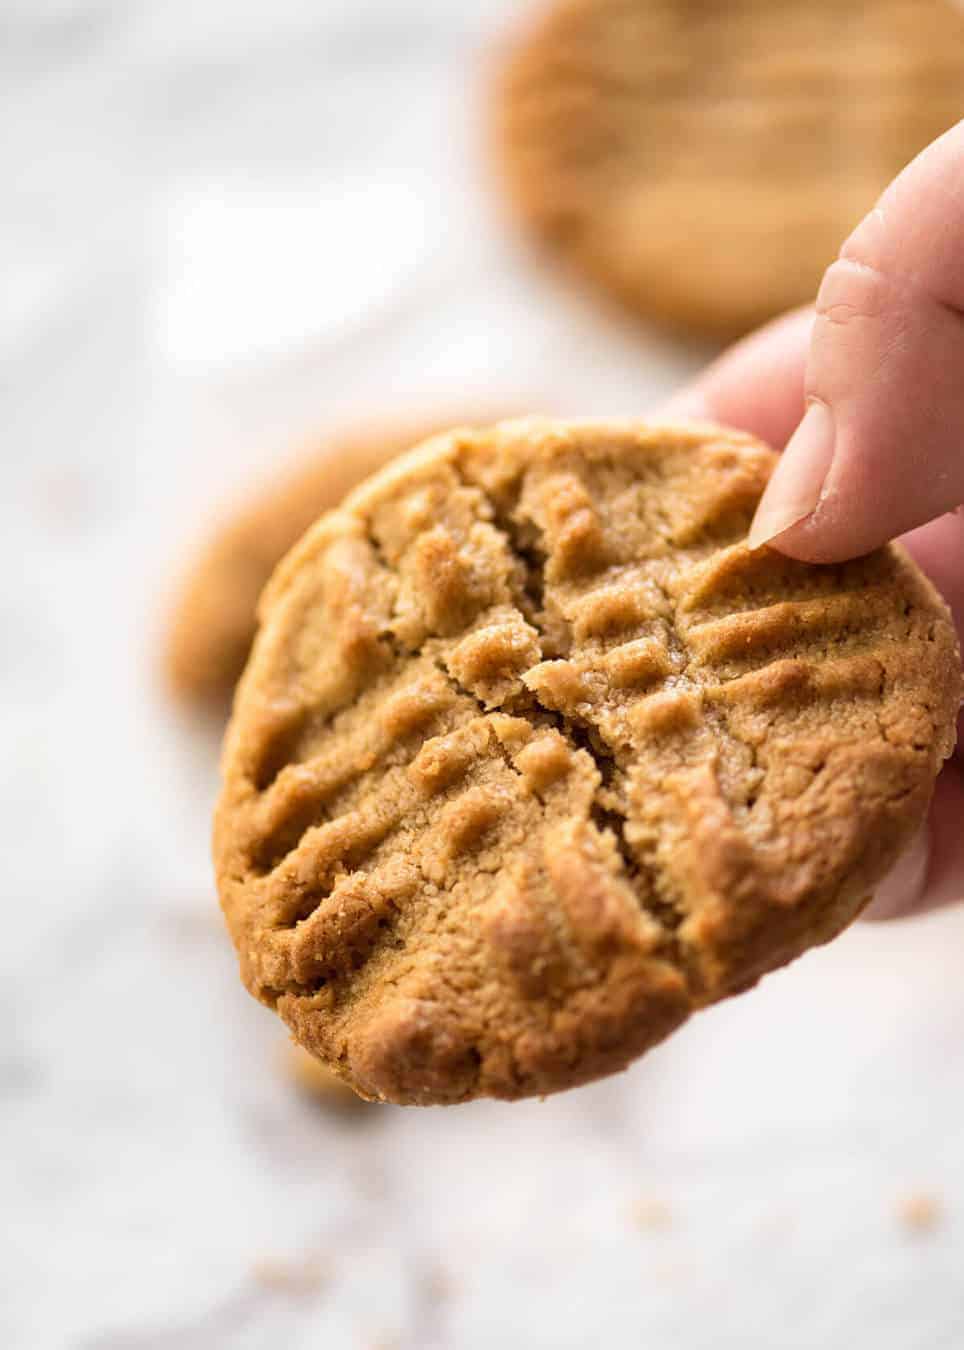 The World's Best Easy Peanut Butter Cookies are SOFT and CHEWY. Peanut butter, brown sugar and egg is all you need! www.recipetineats.com